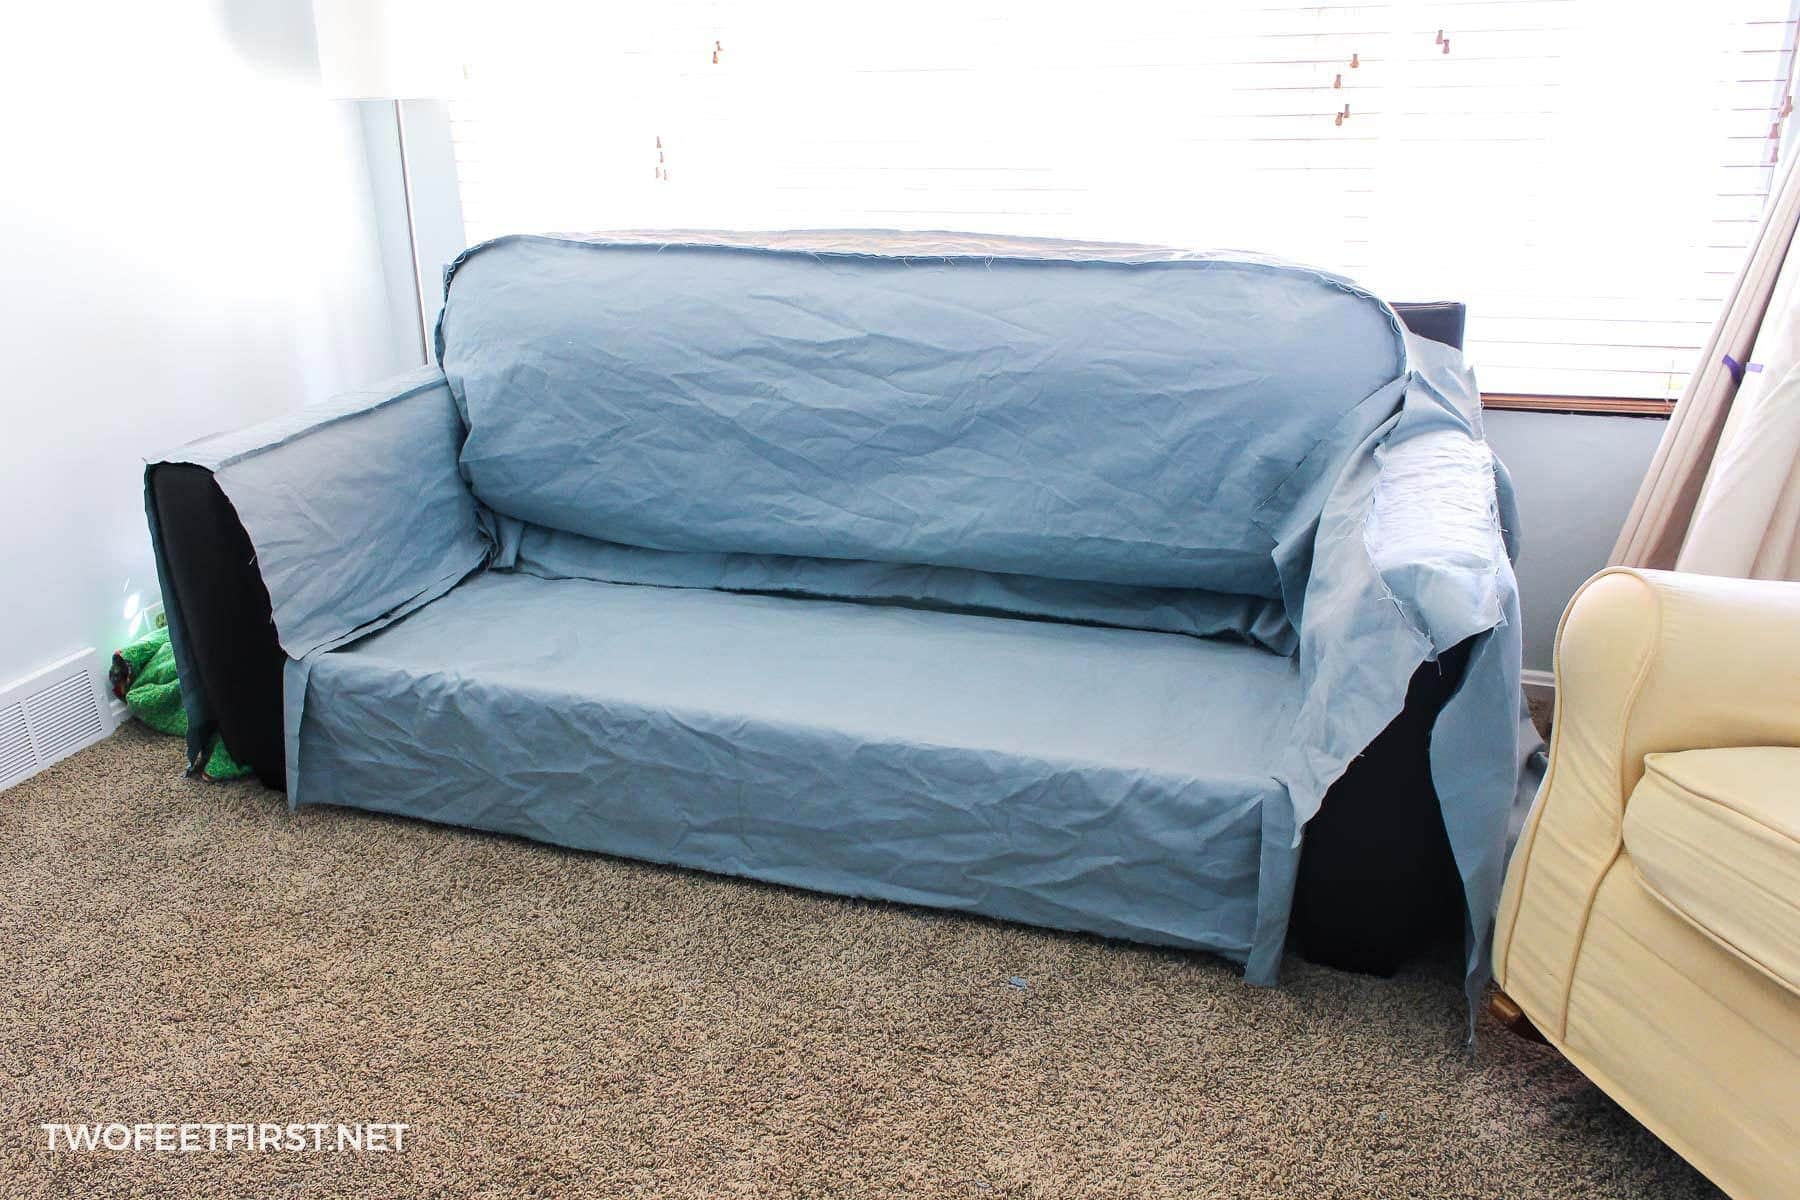 Make Slipcover For A Sofa Diy Couch Cover, How To Replace Leather Sofa Covers